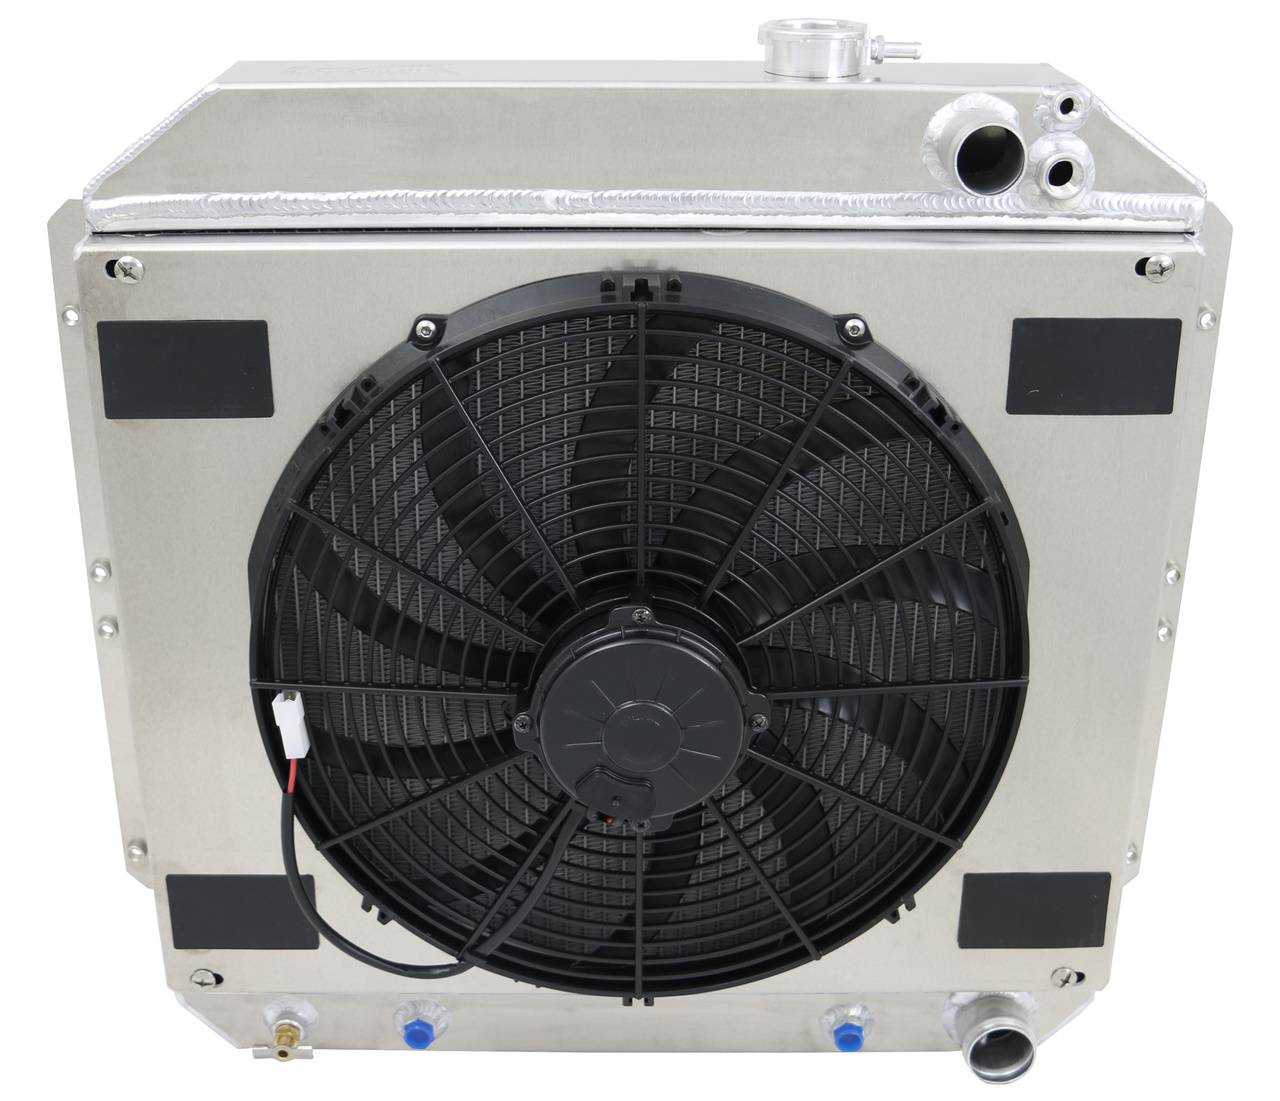 Wizard Cooling Inc - Wizard Cooling - 1949-1954 Chevrolet Bel Air/ Impala Aluminum Radiator With Fan - 10024-108LSMD